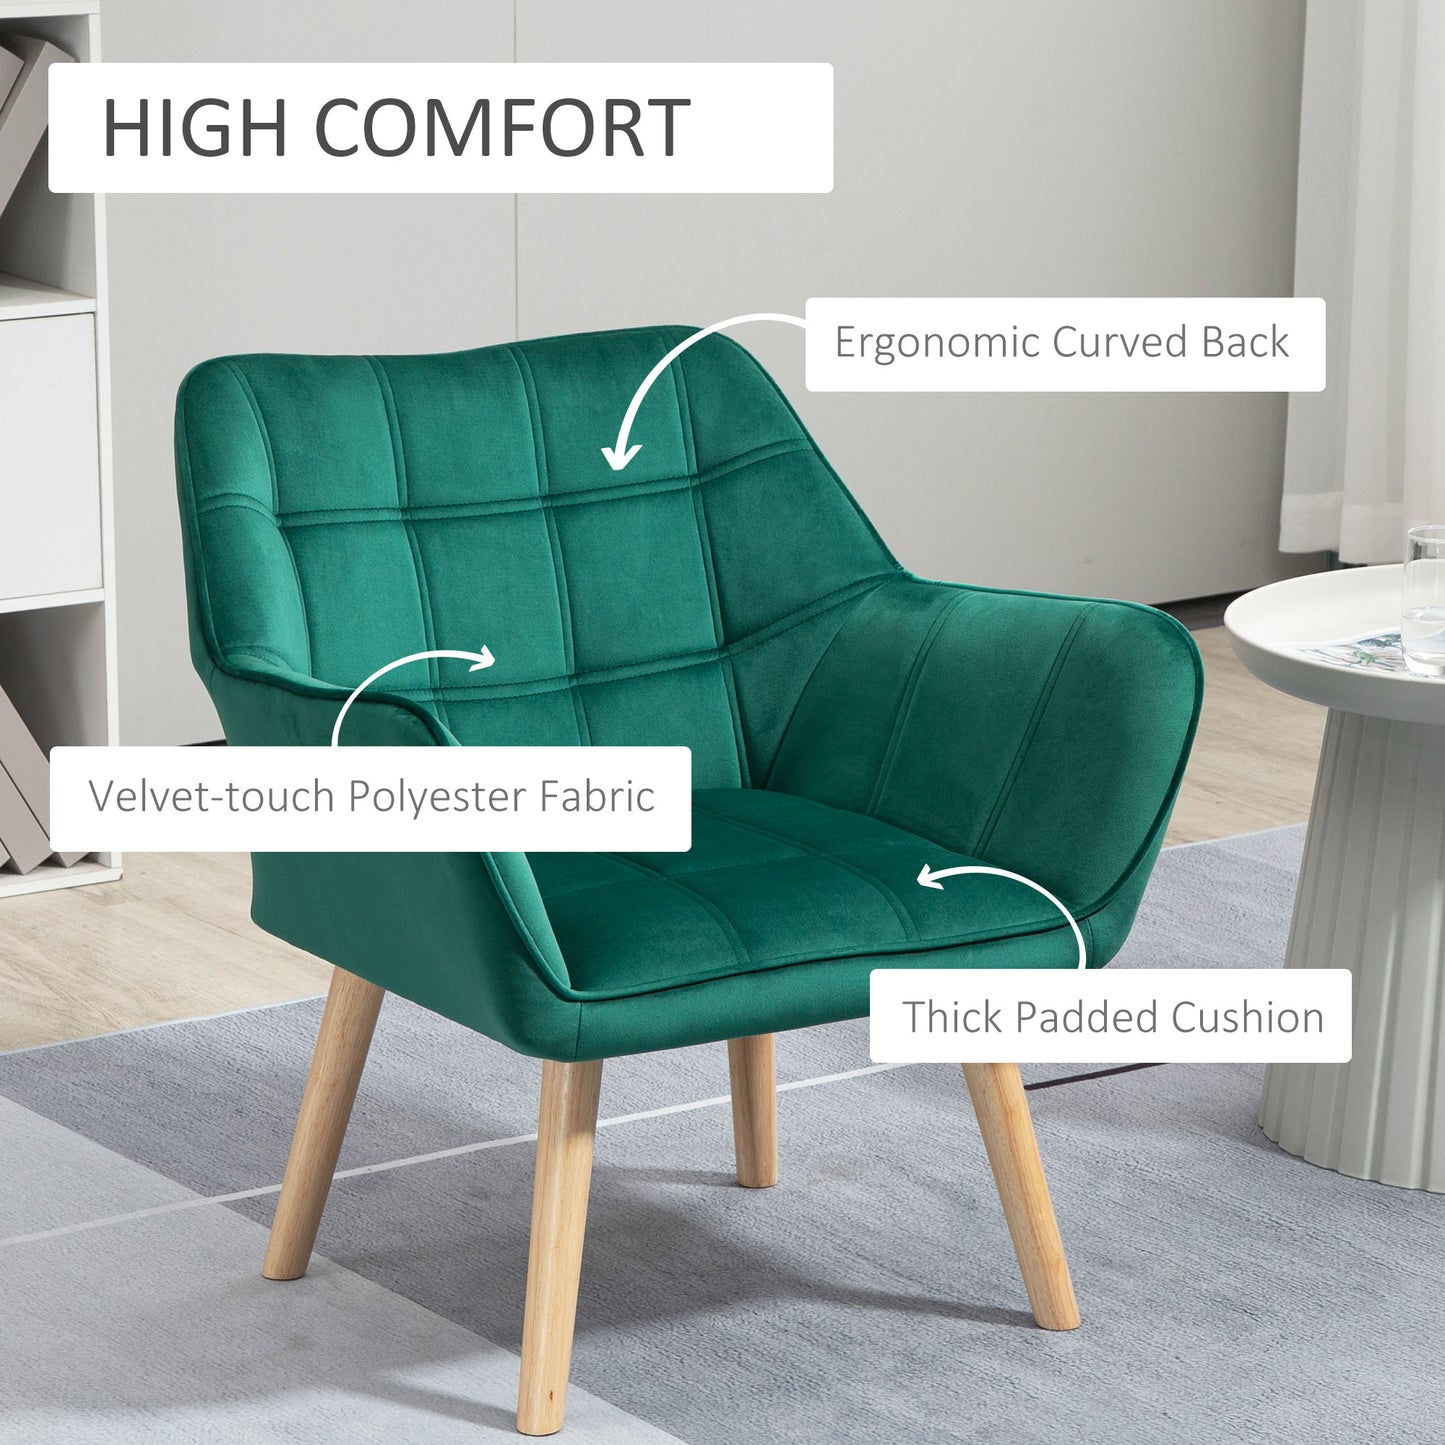 HOMCOM Accent Chair, Arm Chair with Wide Arms, Slanted Back, Thick Padding and Rubber Wooden Legs for Living Room, Green